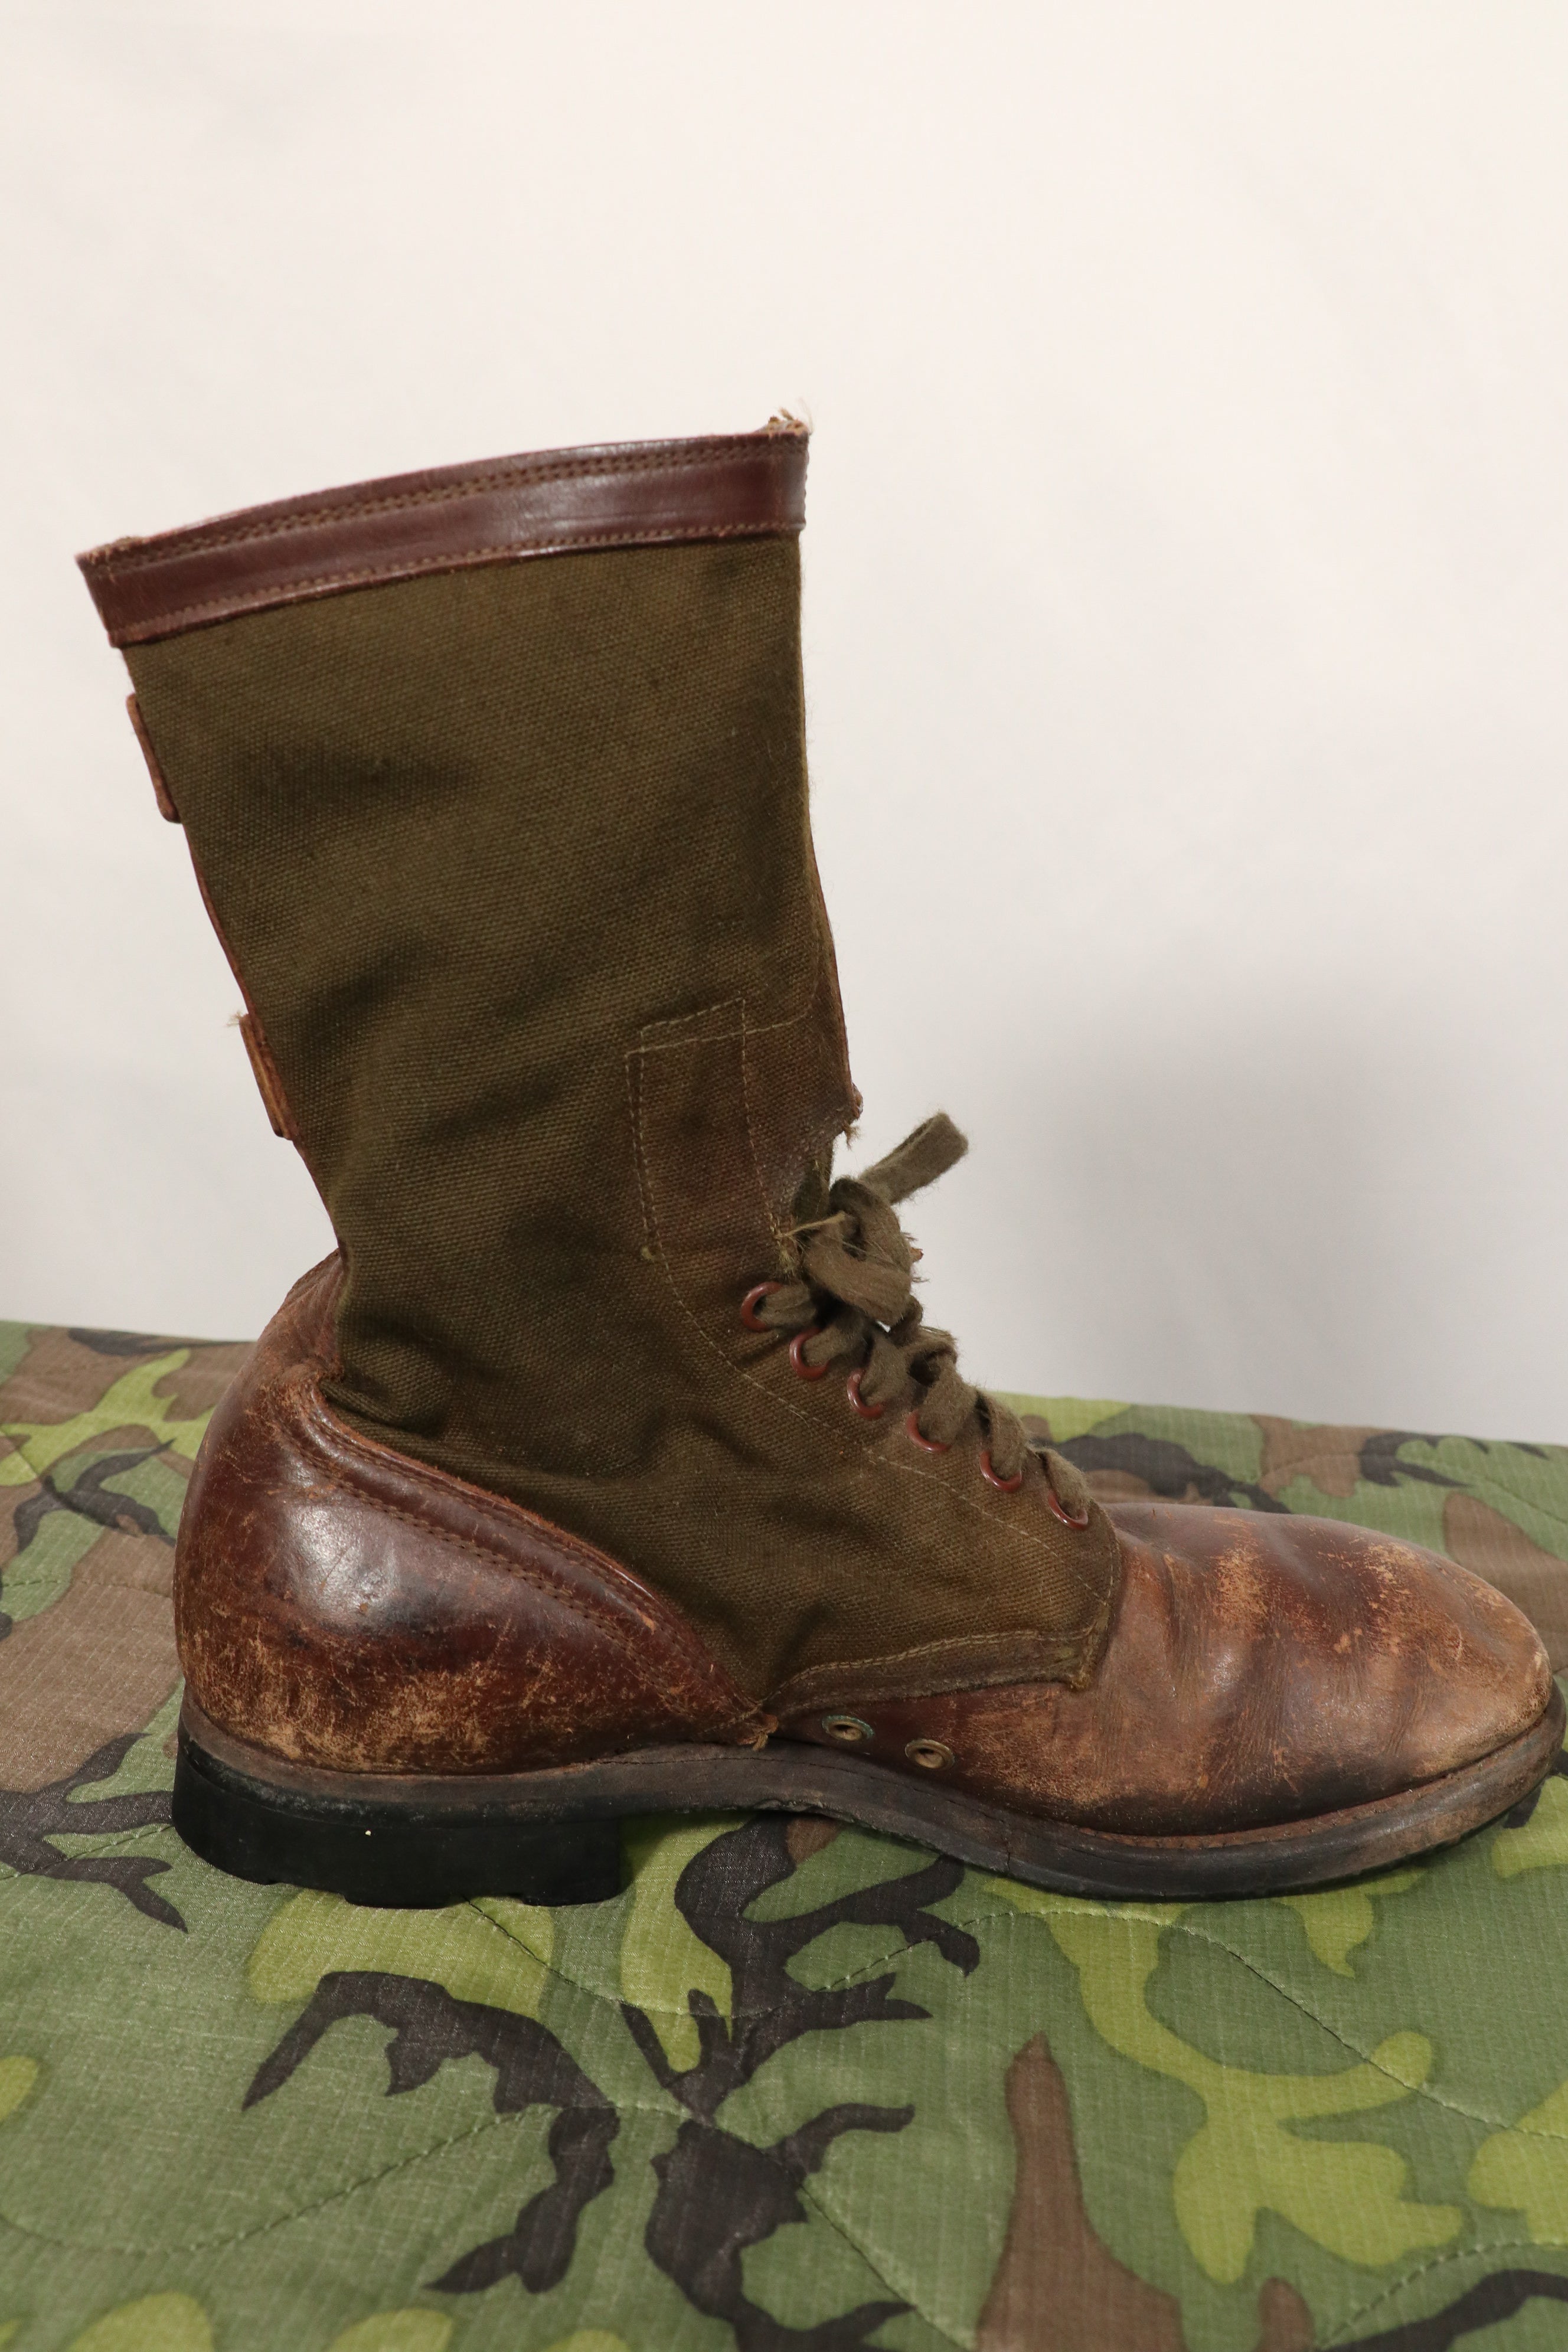 Real 1950s Tropical Boots, commonly known as Okinawan Boots, rare, used.